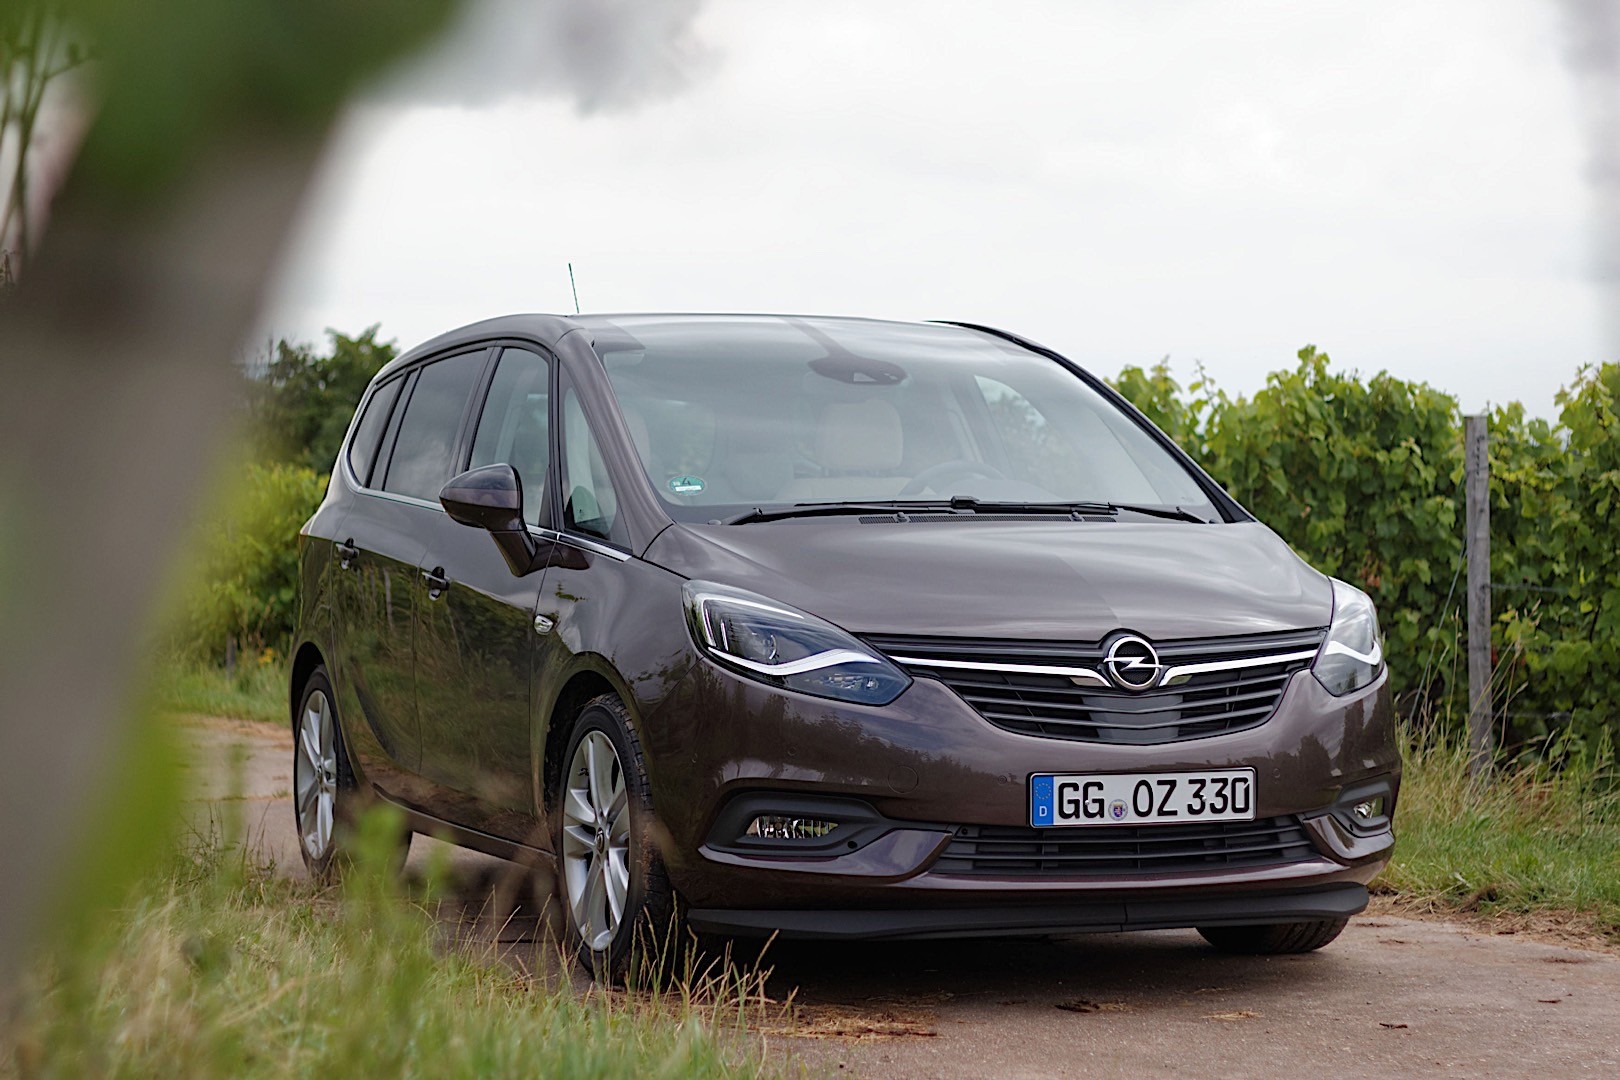 Opel Zafira (2017) - pictures, information & specs